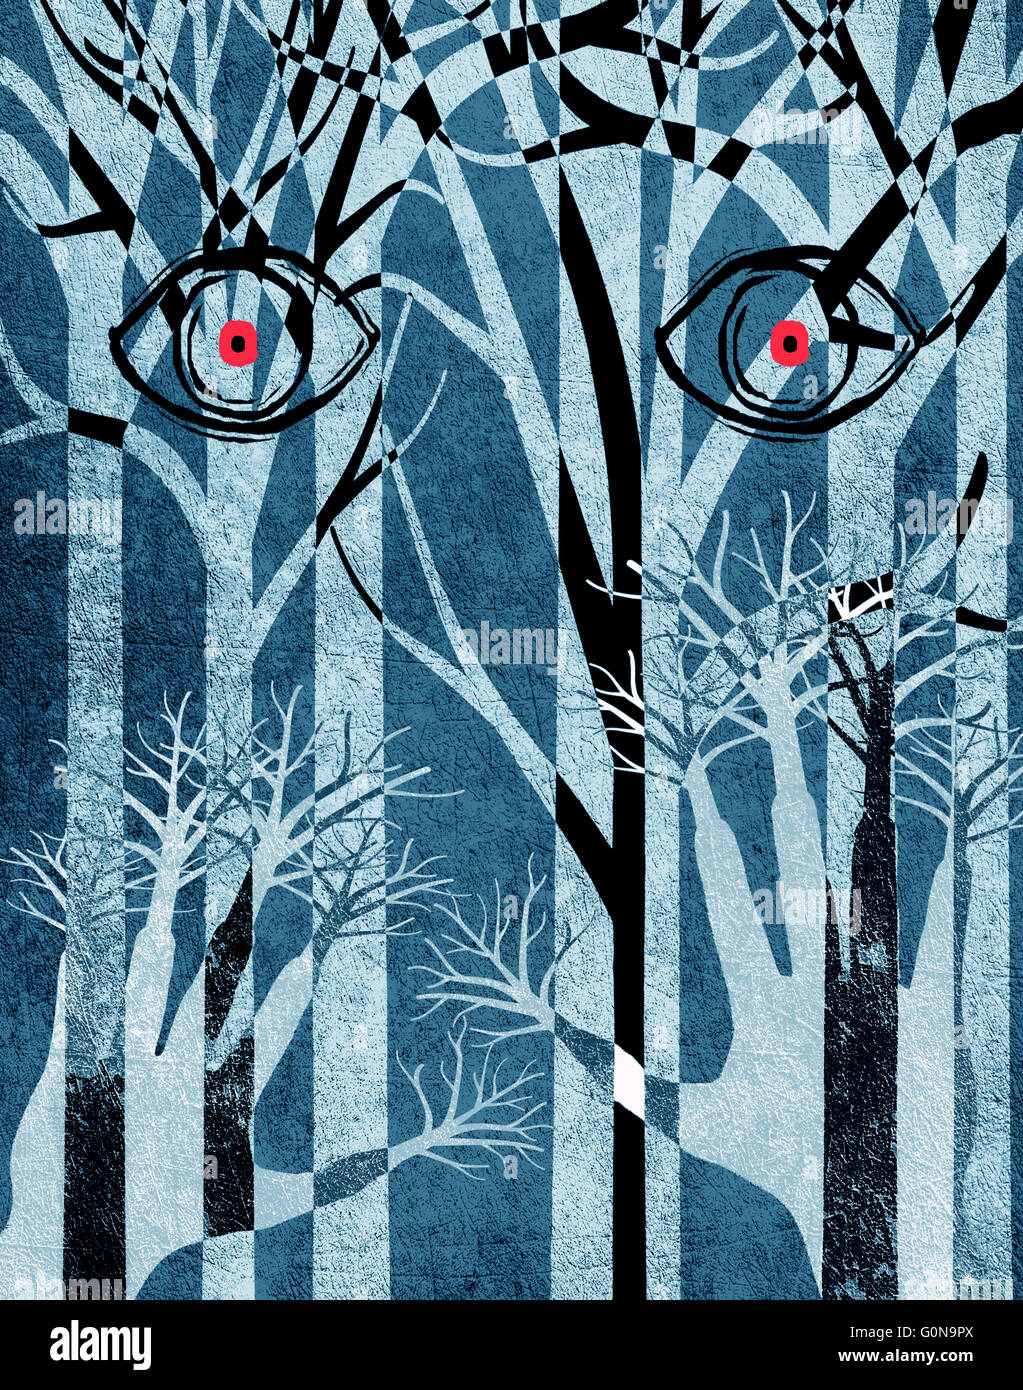 blue forest with eyes and hands digital illustration Stock Photo